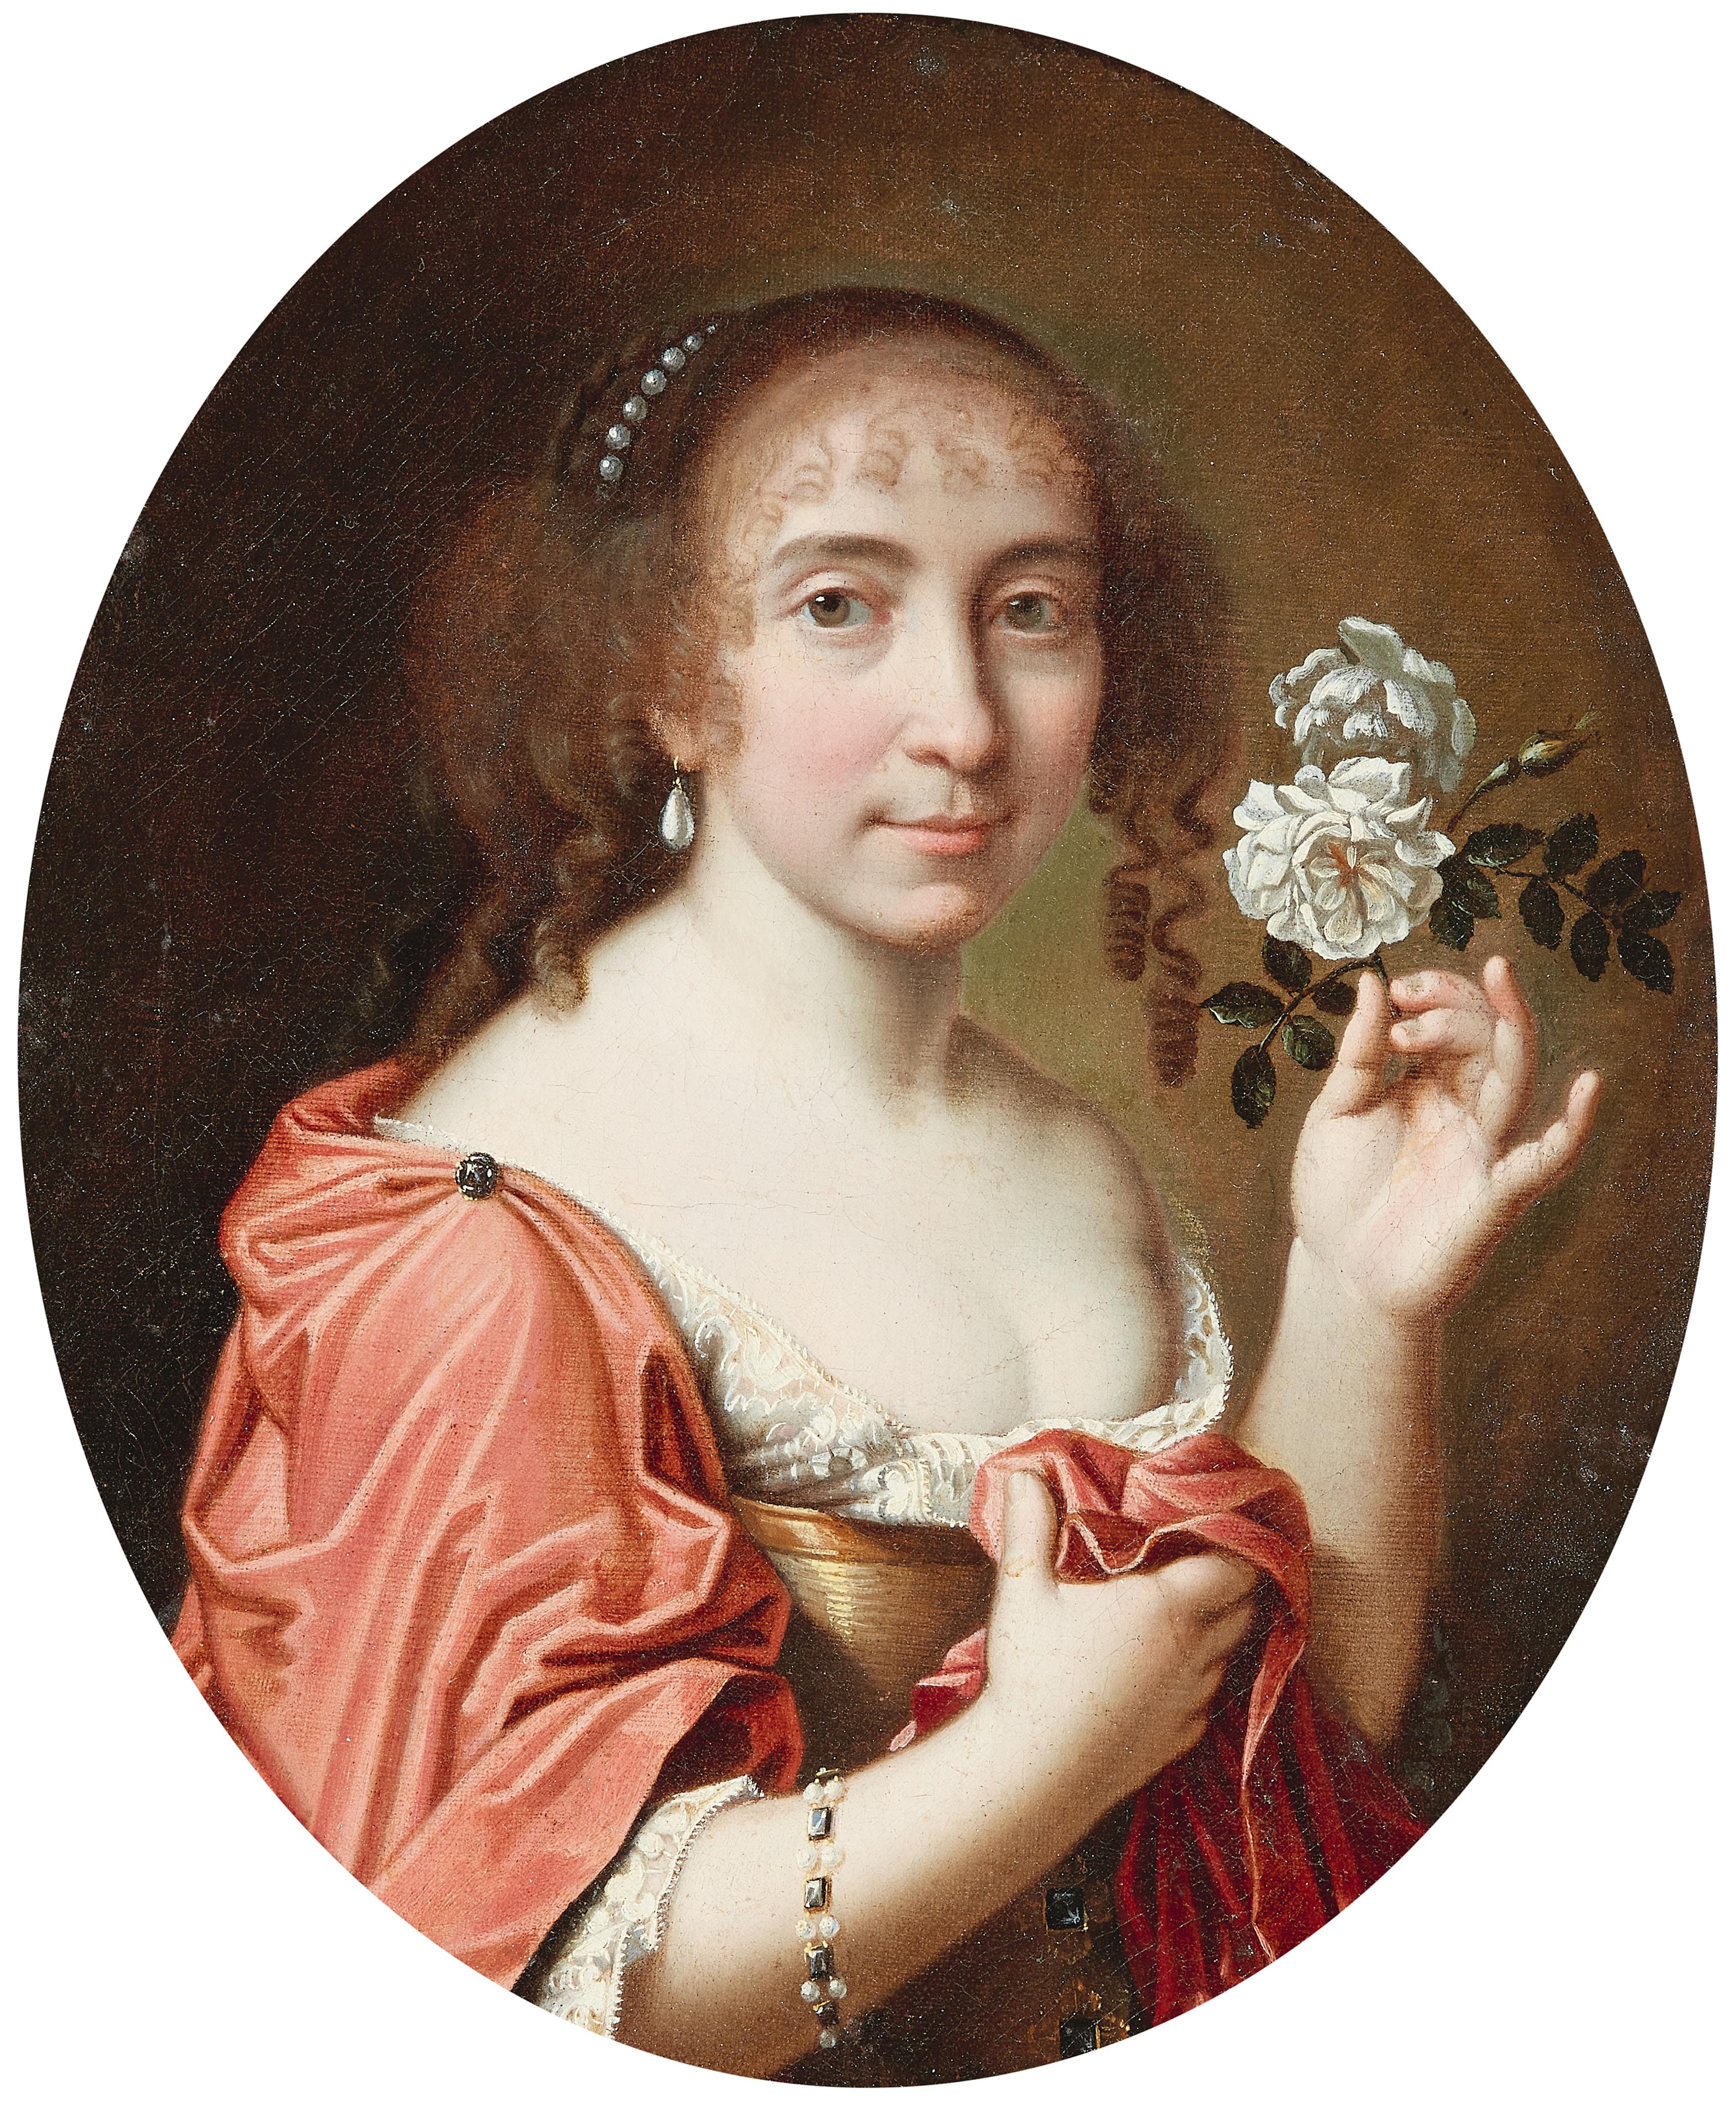 Charles Beauburn, attributed to
Henri Beauburn, attributed to - Portrait of a Lady with a Rose - image-1